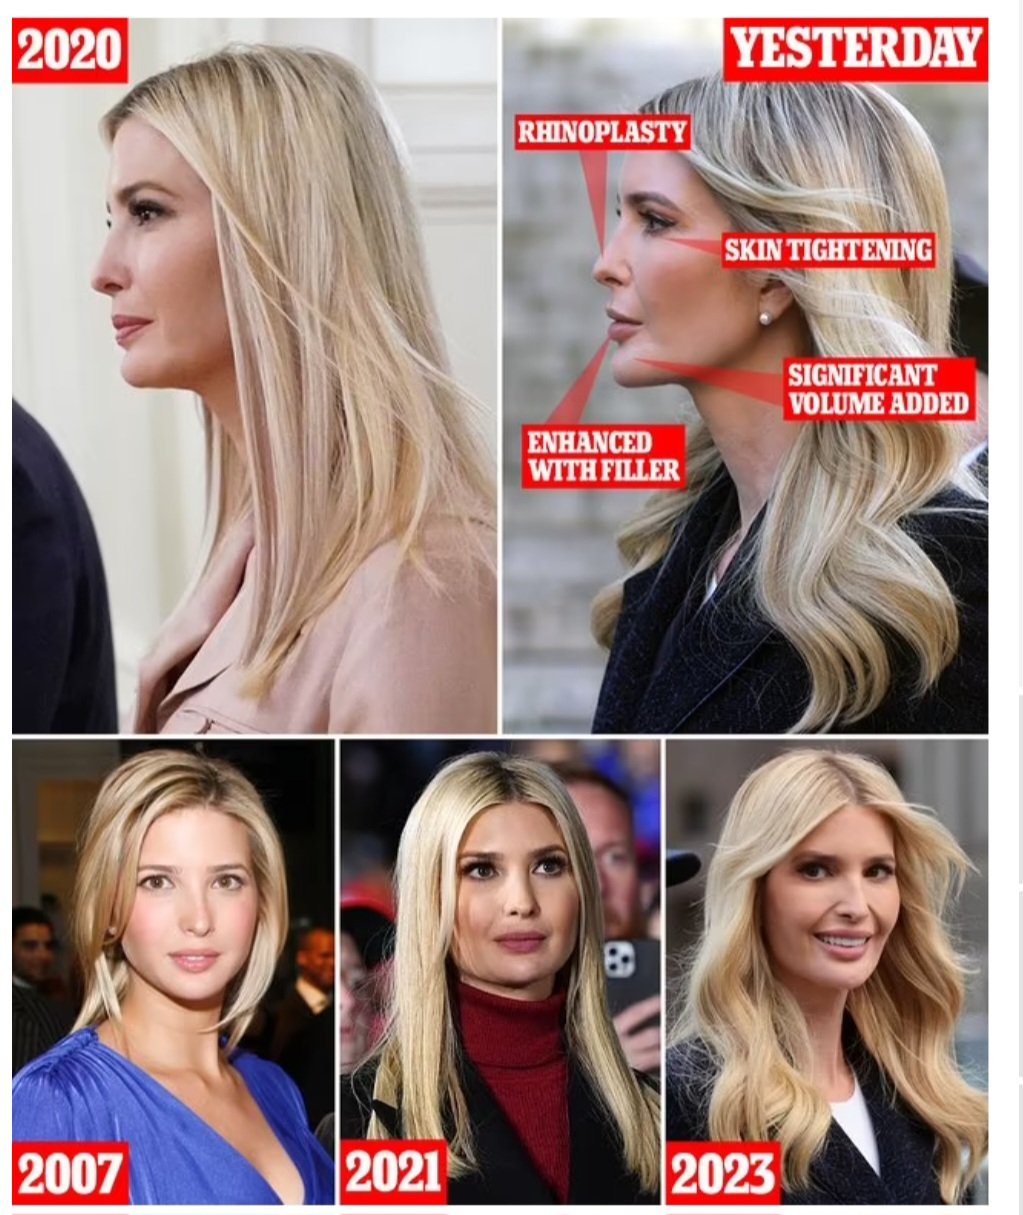 Ivanka Trump has been accused of getting plastic surgery by comparing before and after photos of her. 